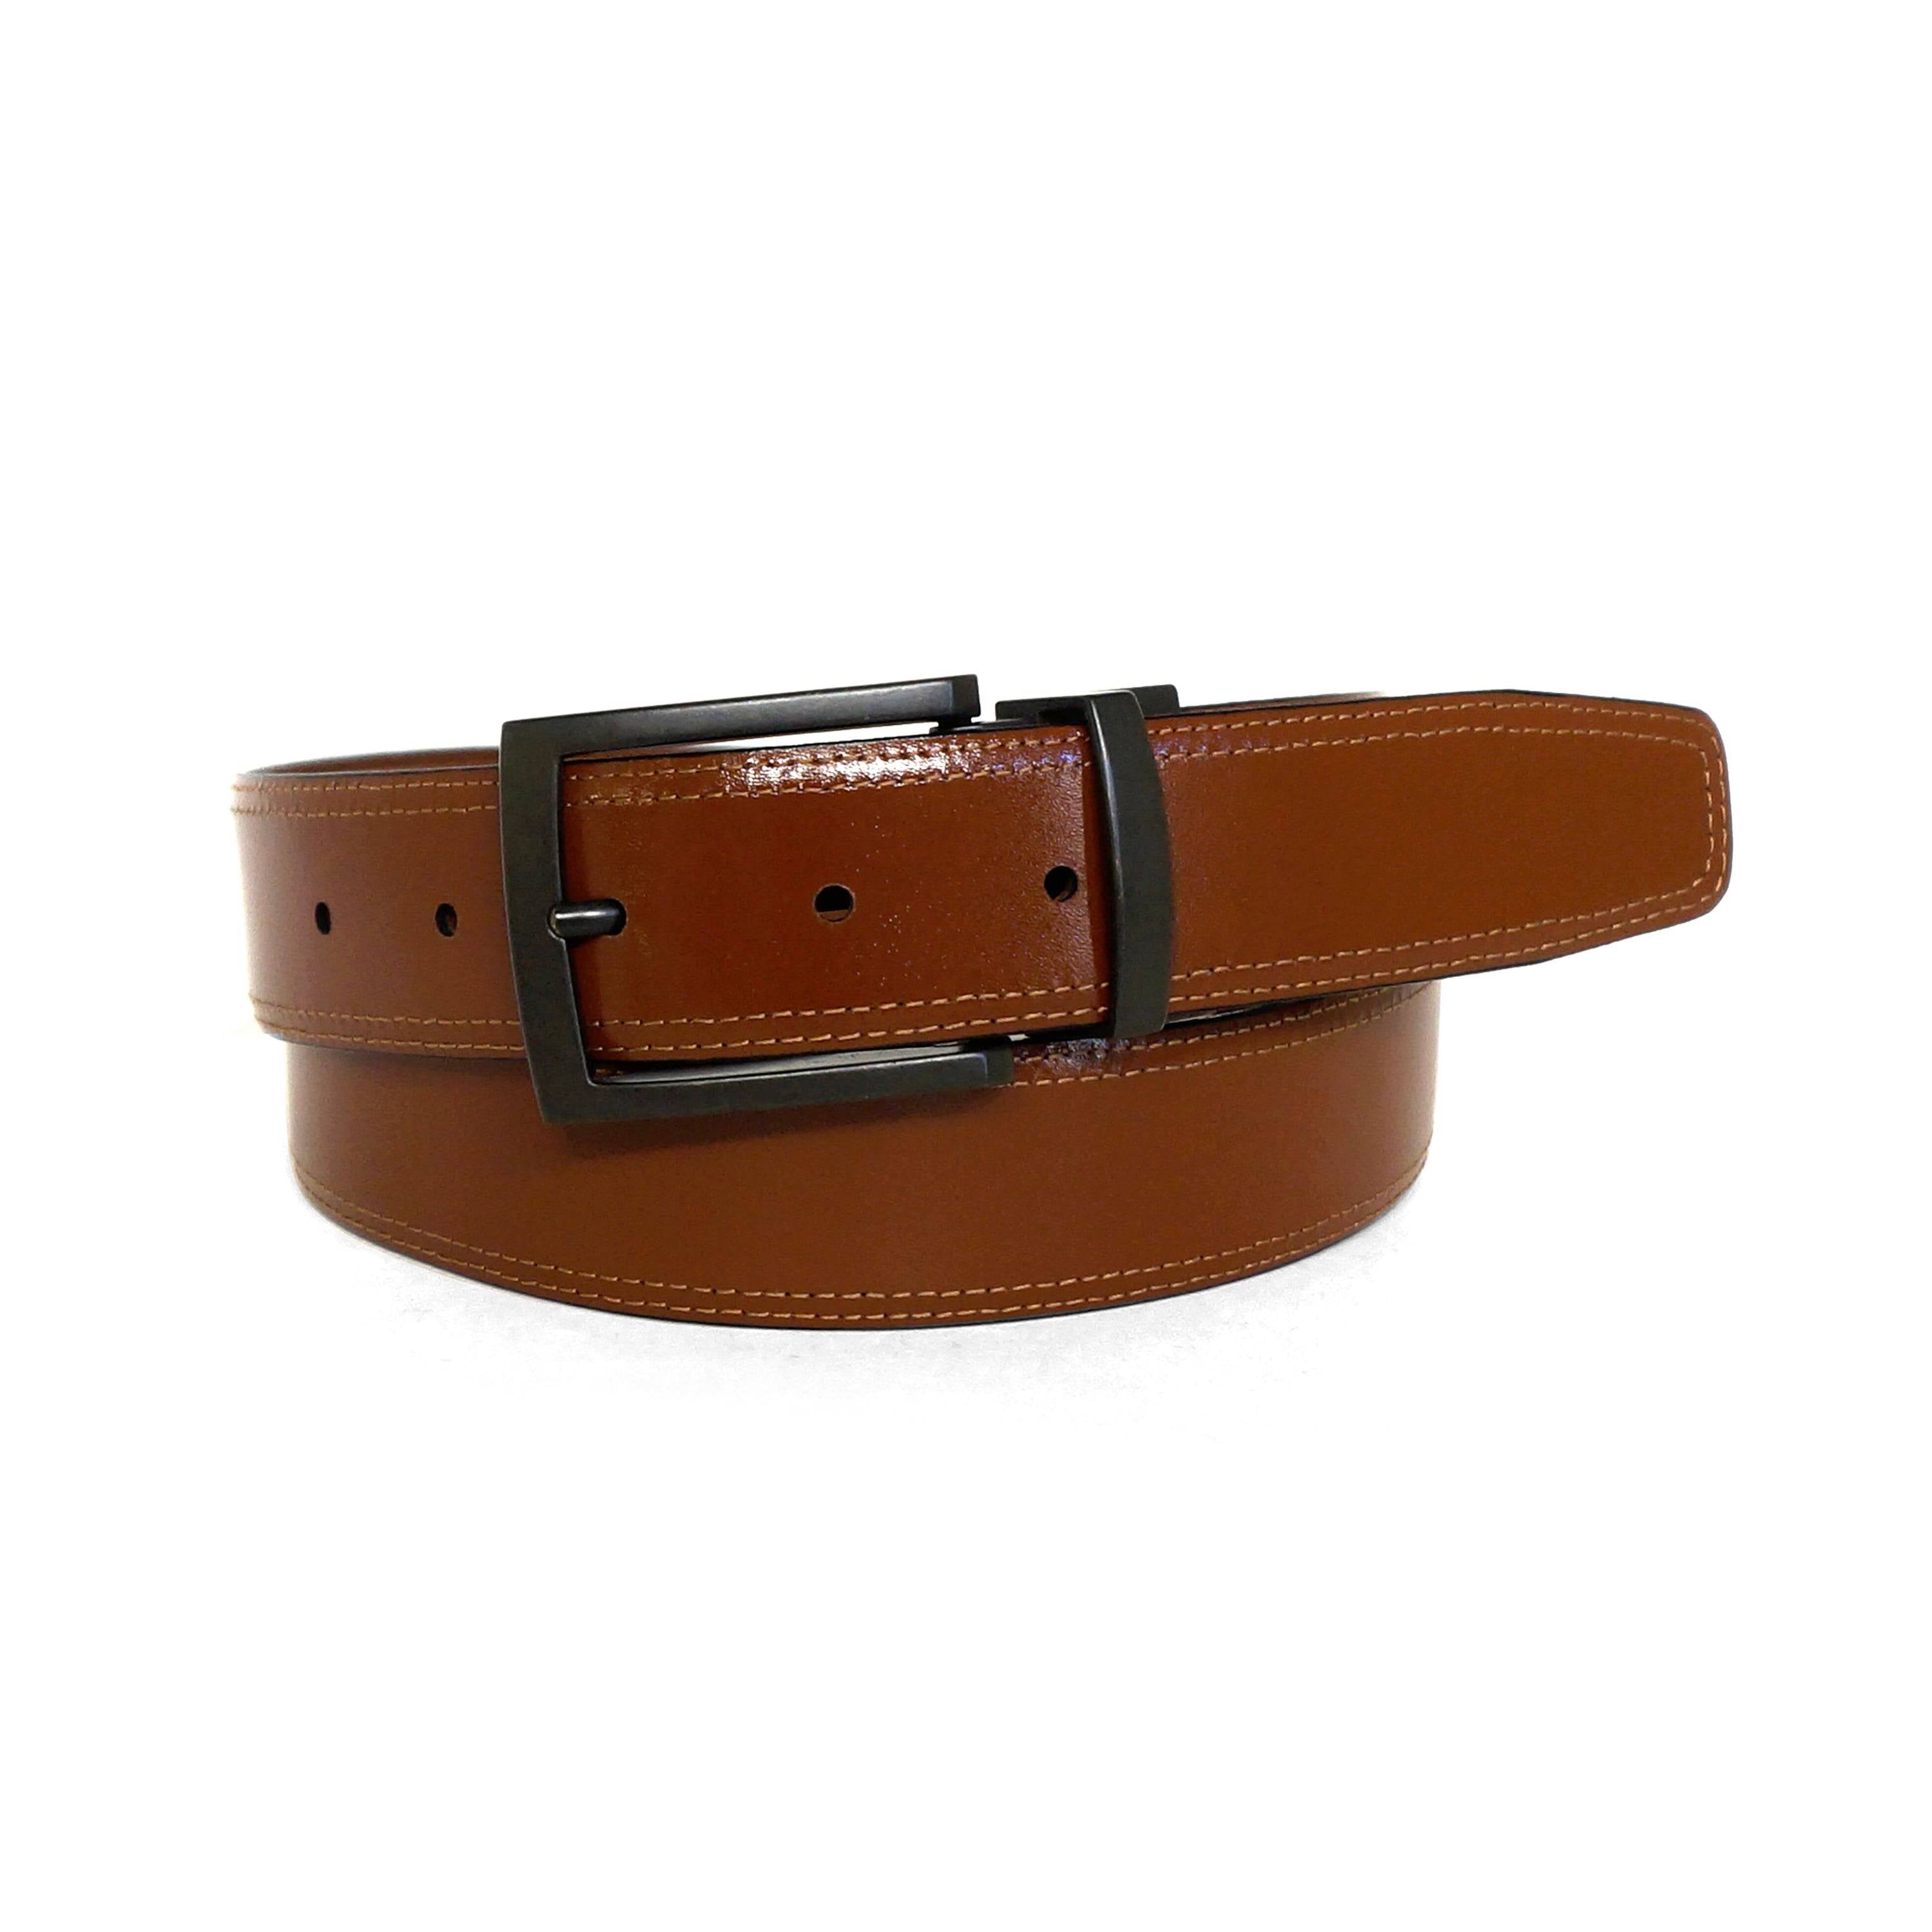 a brown leather belt with a black buckle